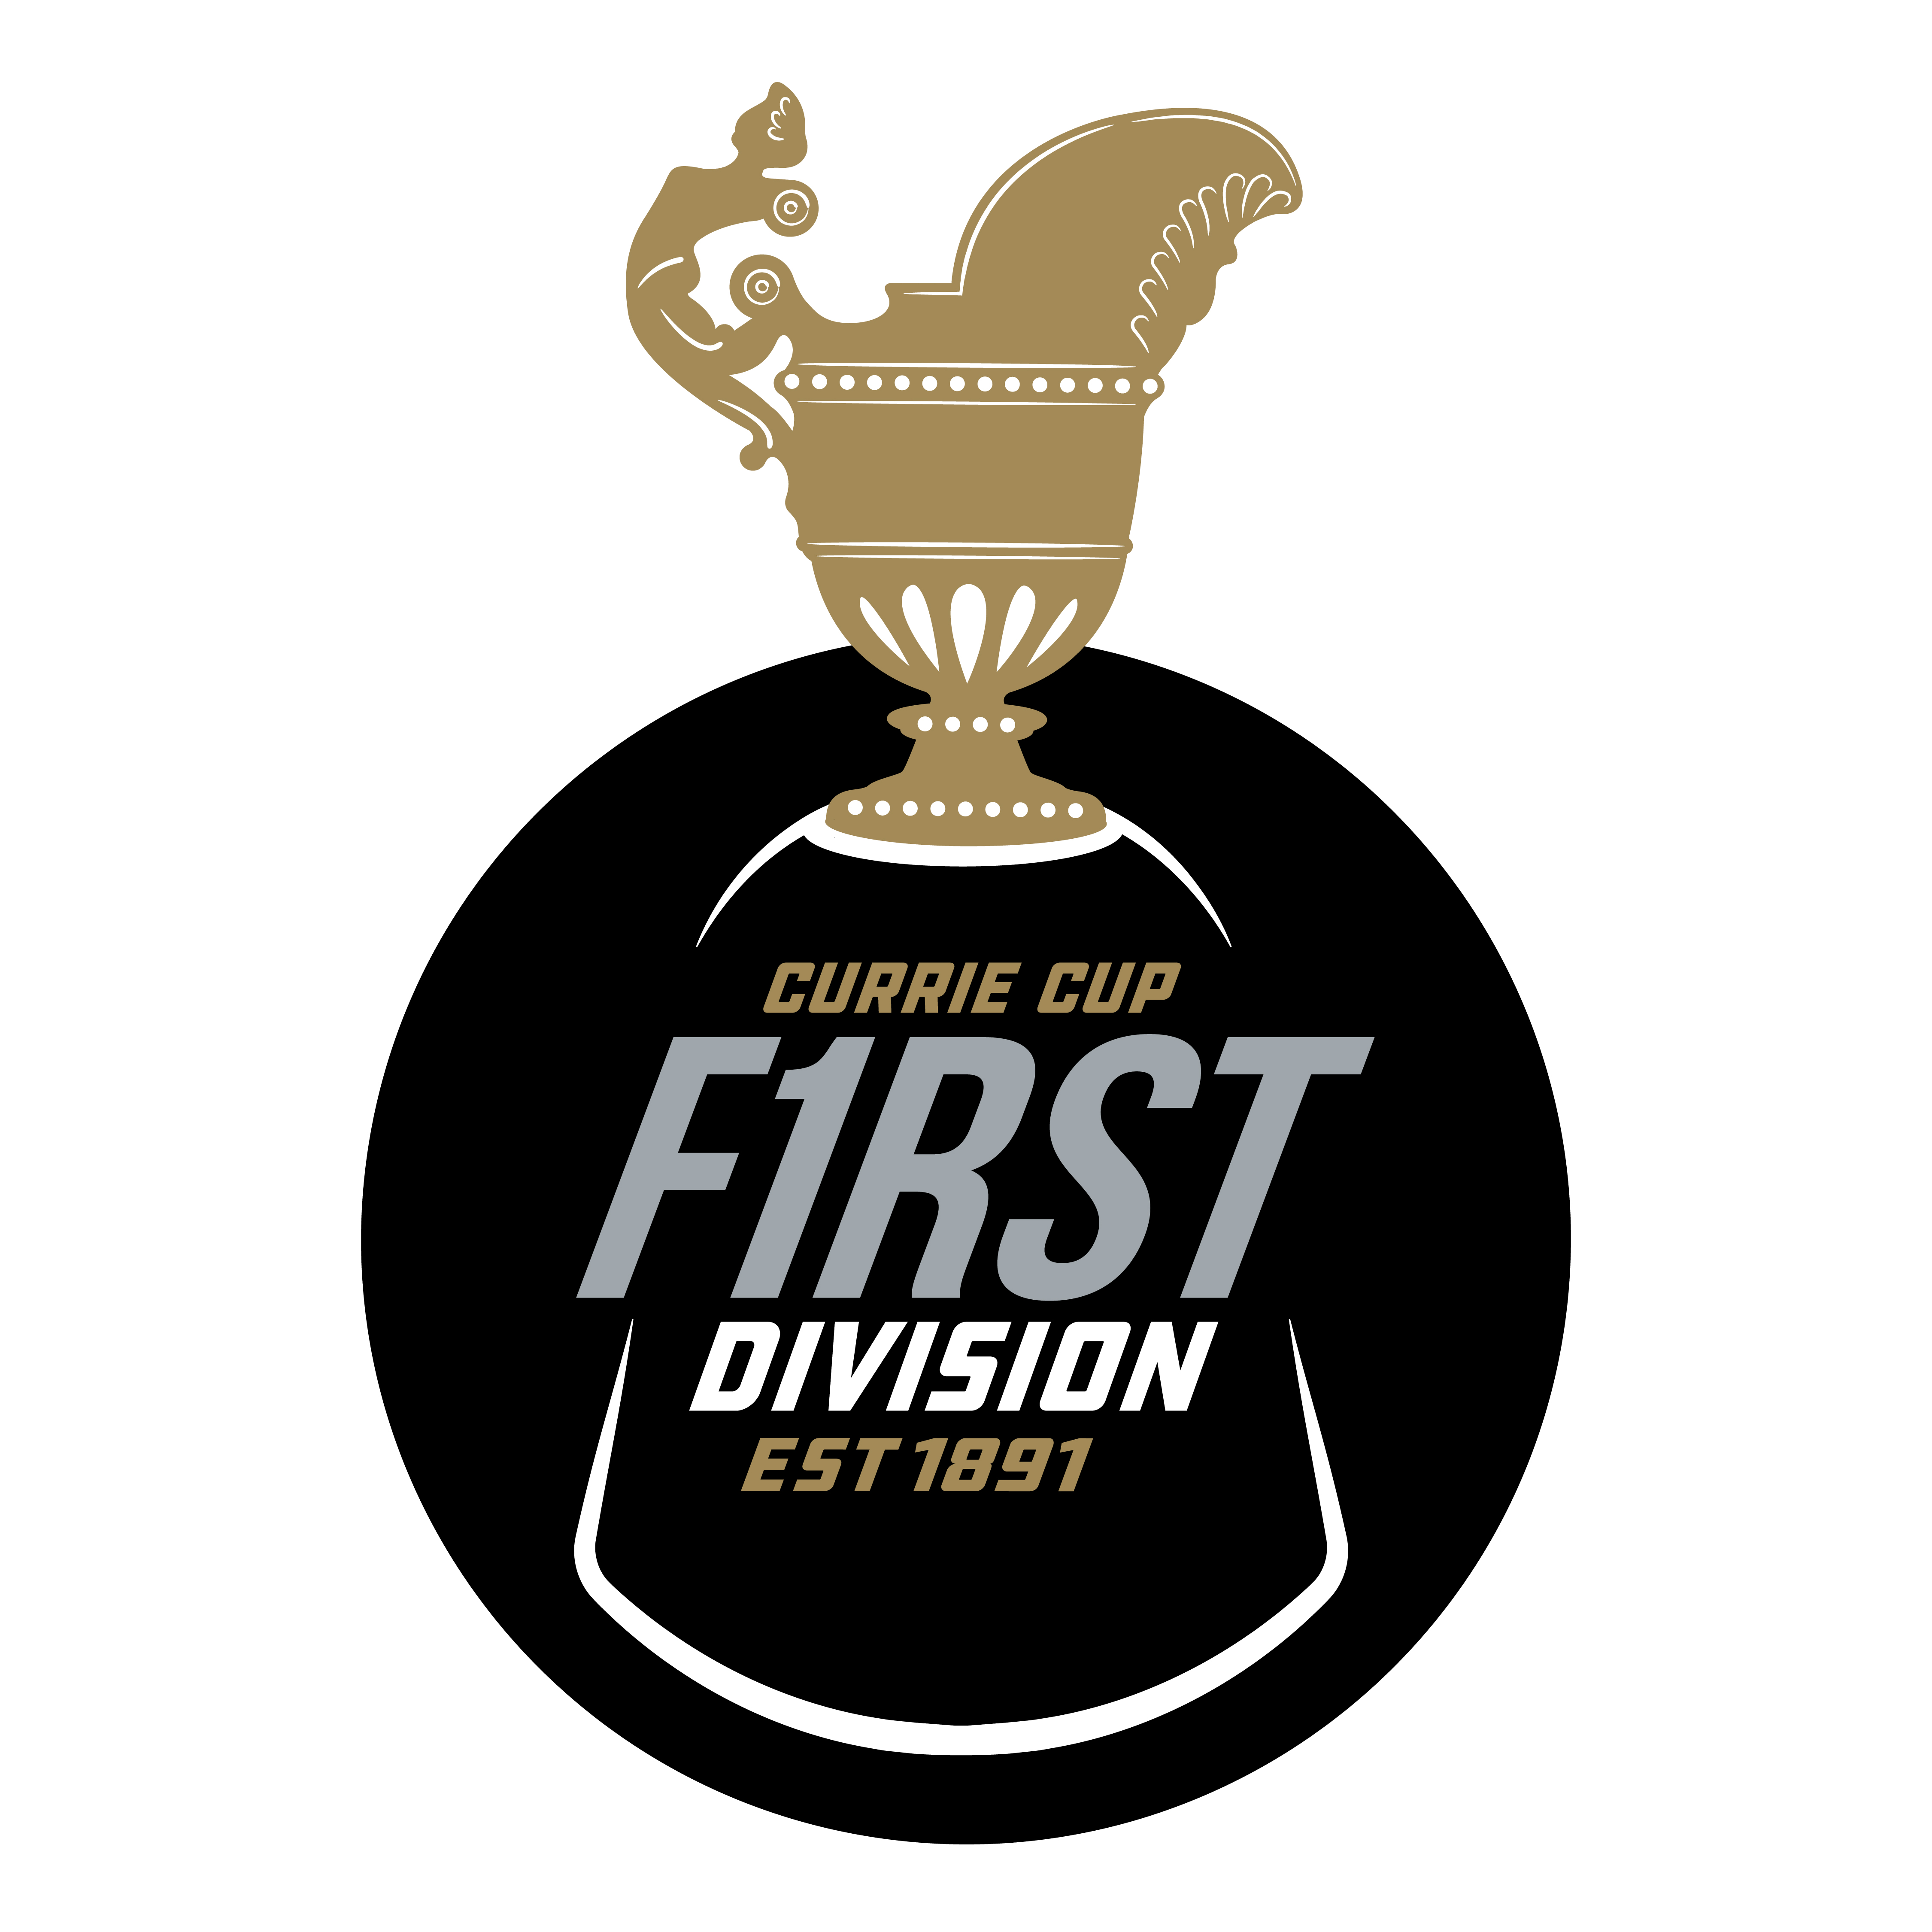 CURRIE CUP FIRST DIVISION